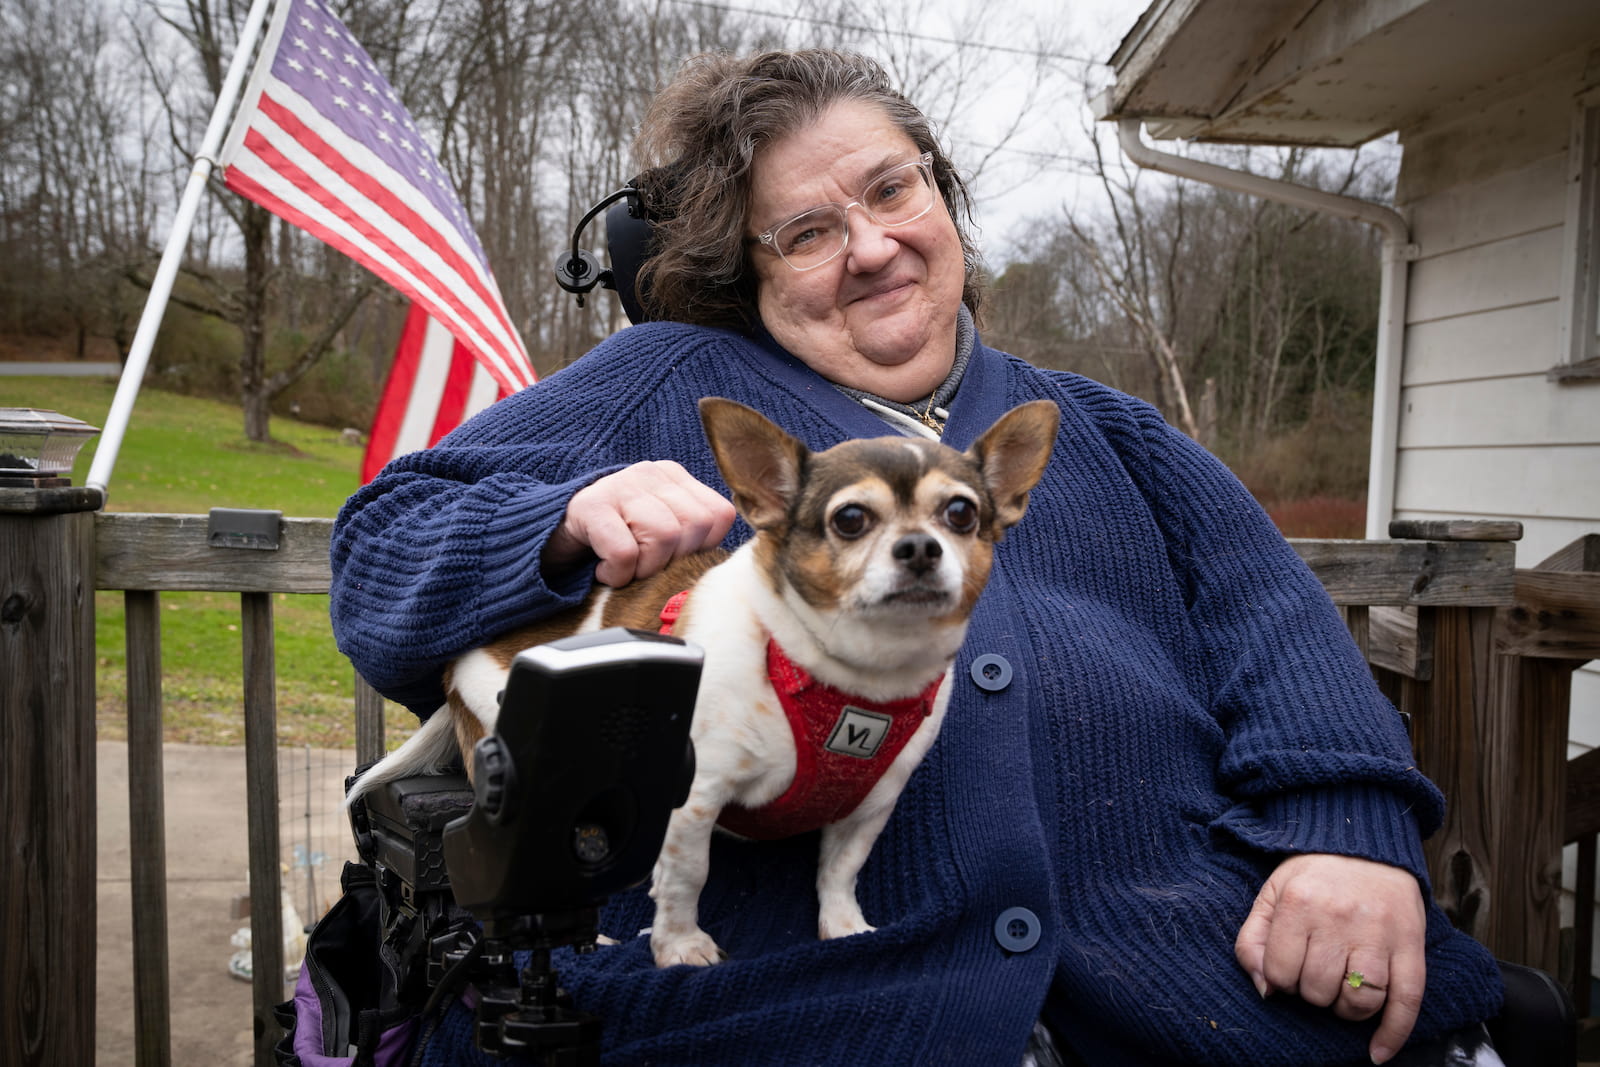 Cindy holding her dog on her lap outside her house, in front of a US flag